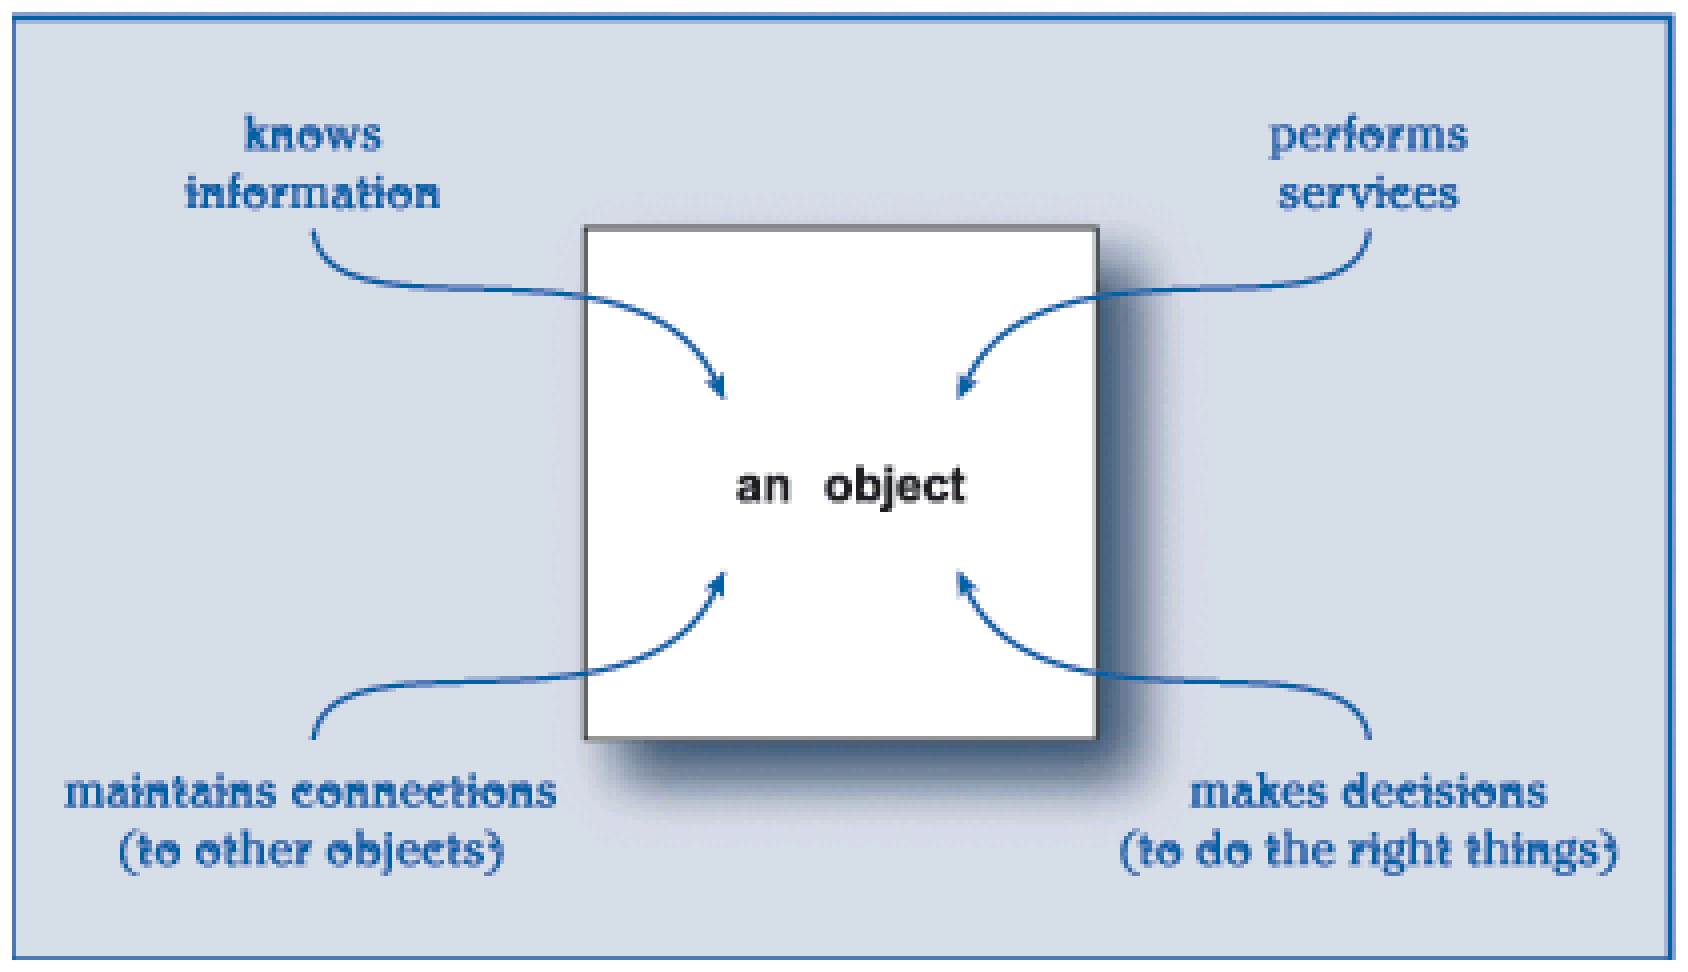 An object encapsulates scripts and information